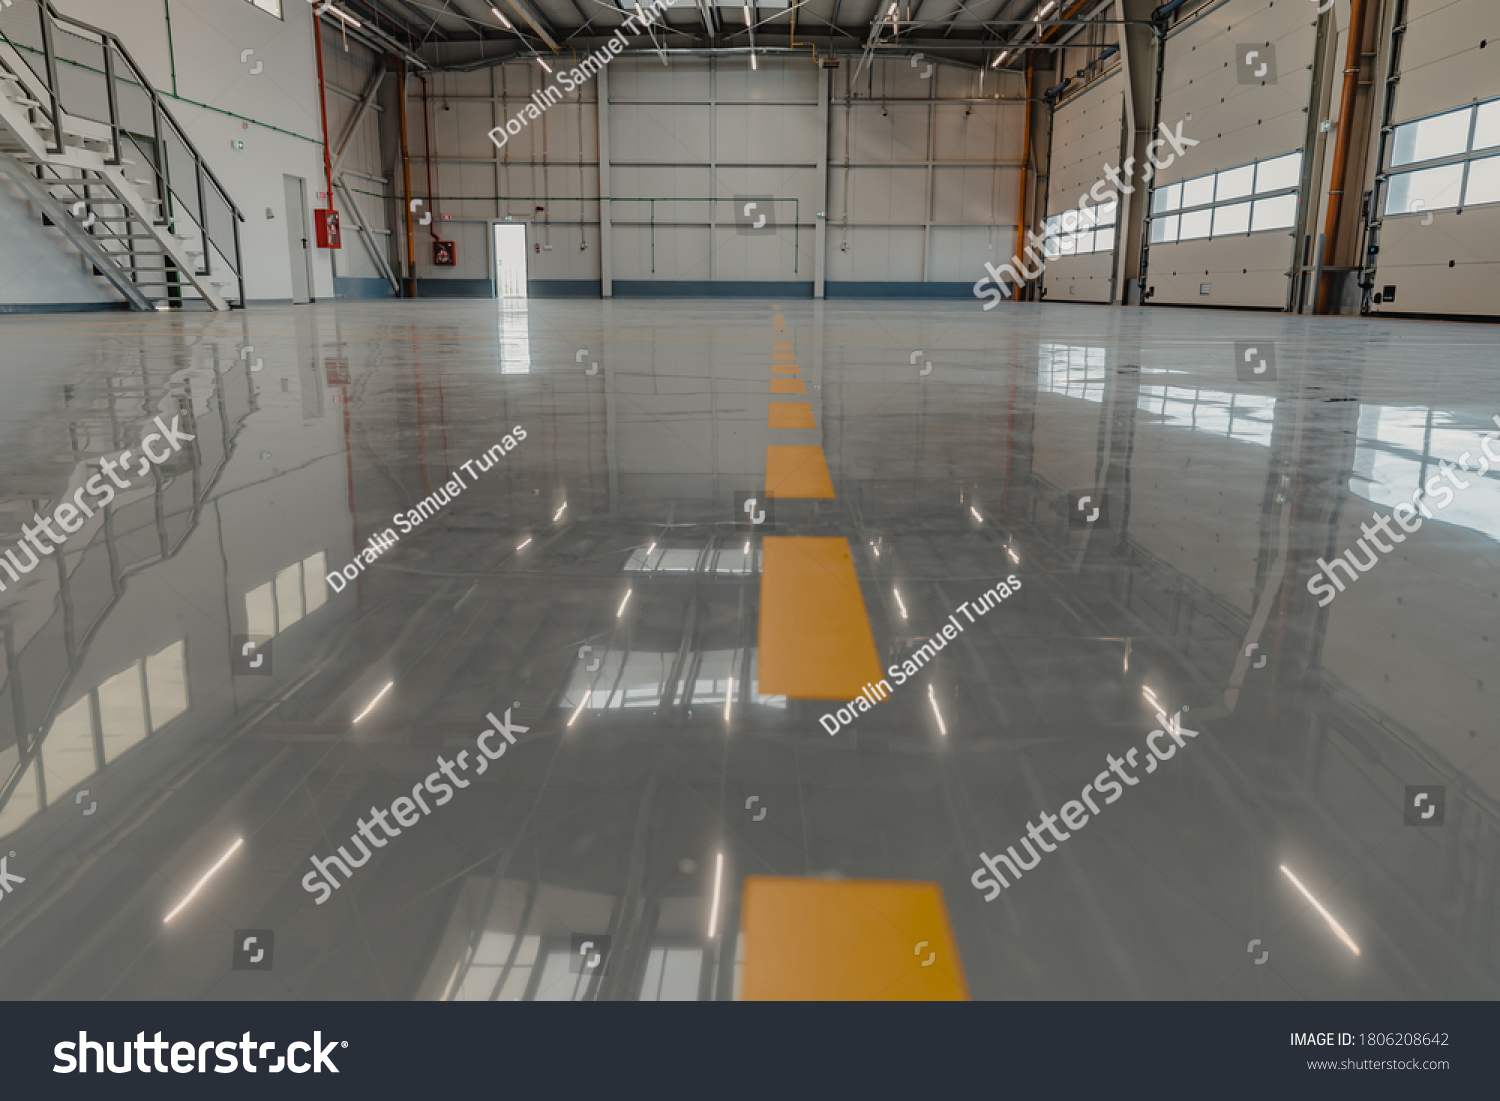 Epoxy and waxed flooring with colorful signage in car service #1806208642